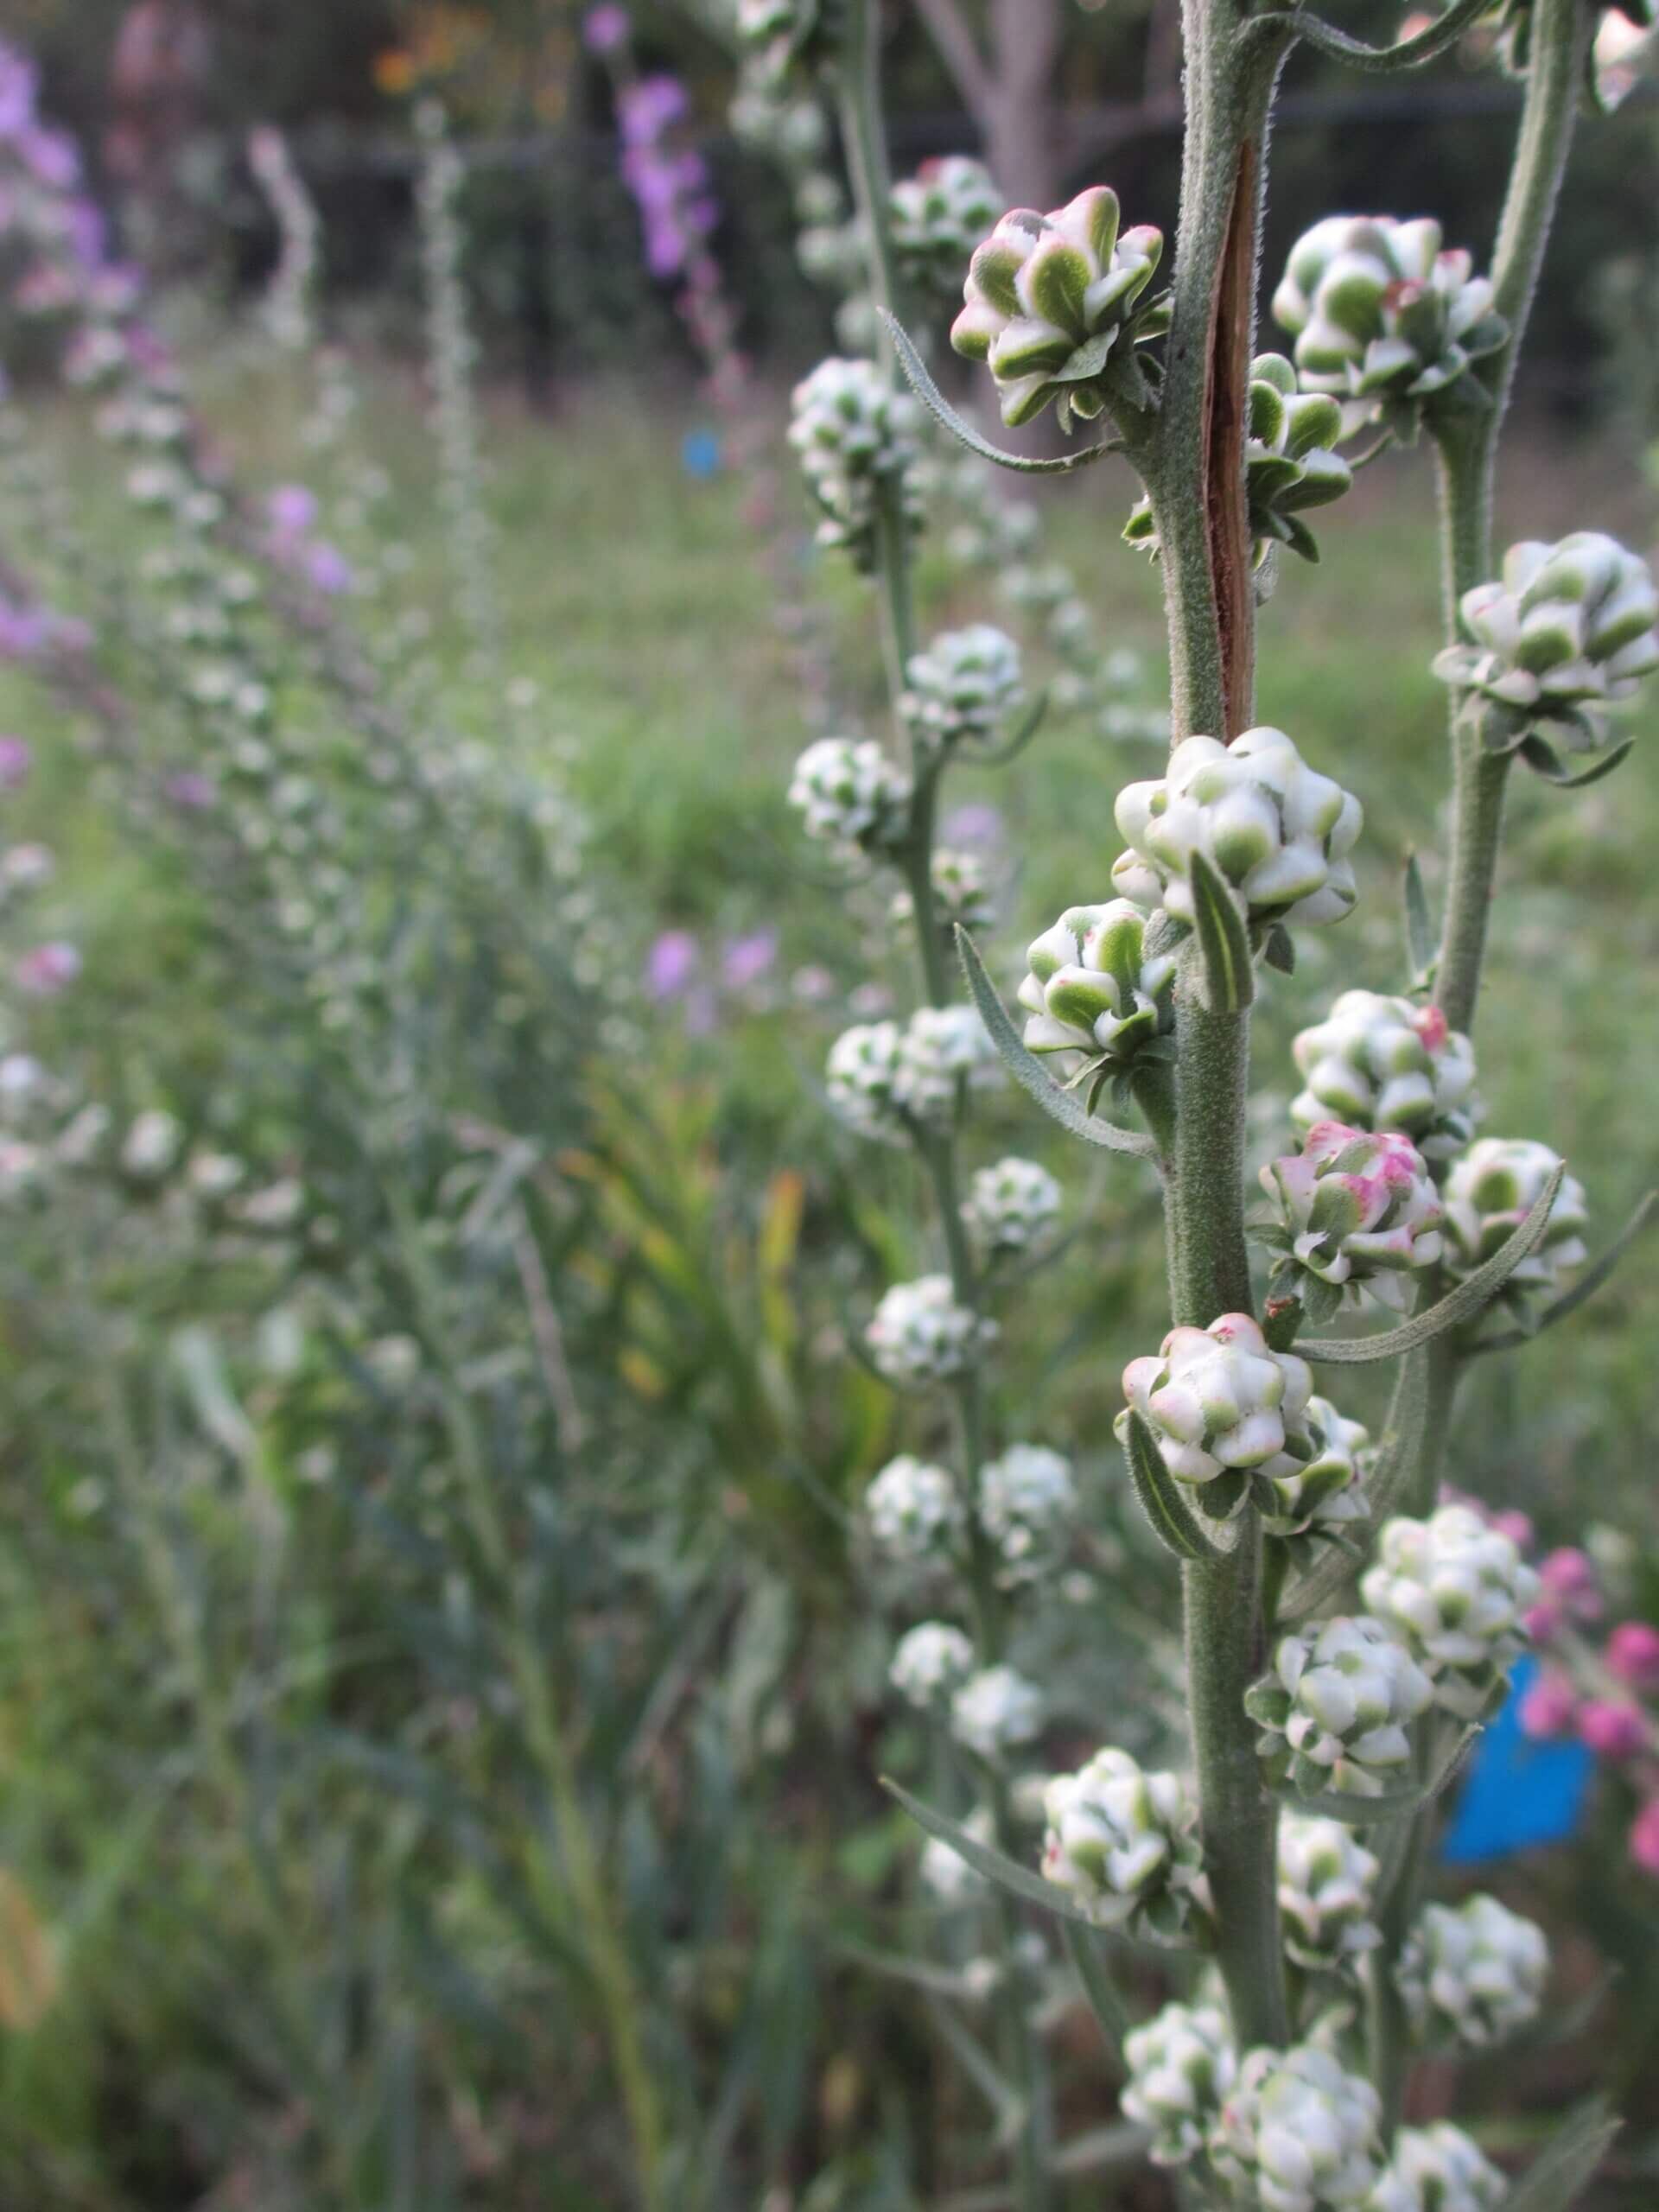 White Liatris aspera buds along the stem of the plant getting ready to burst open in bloom.